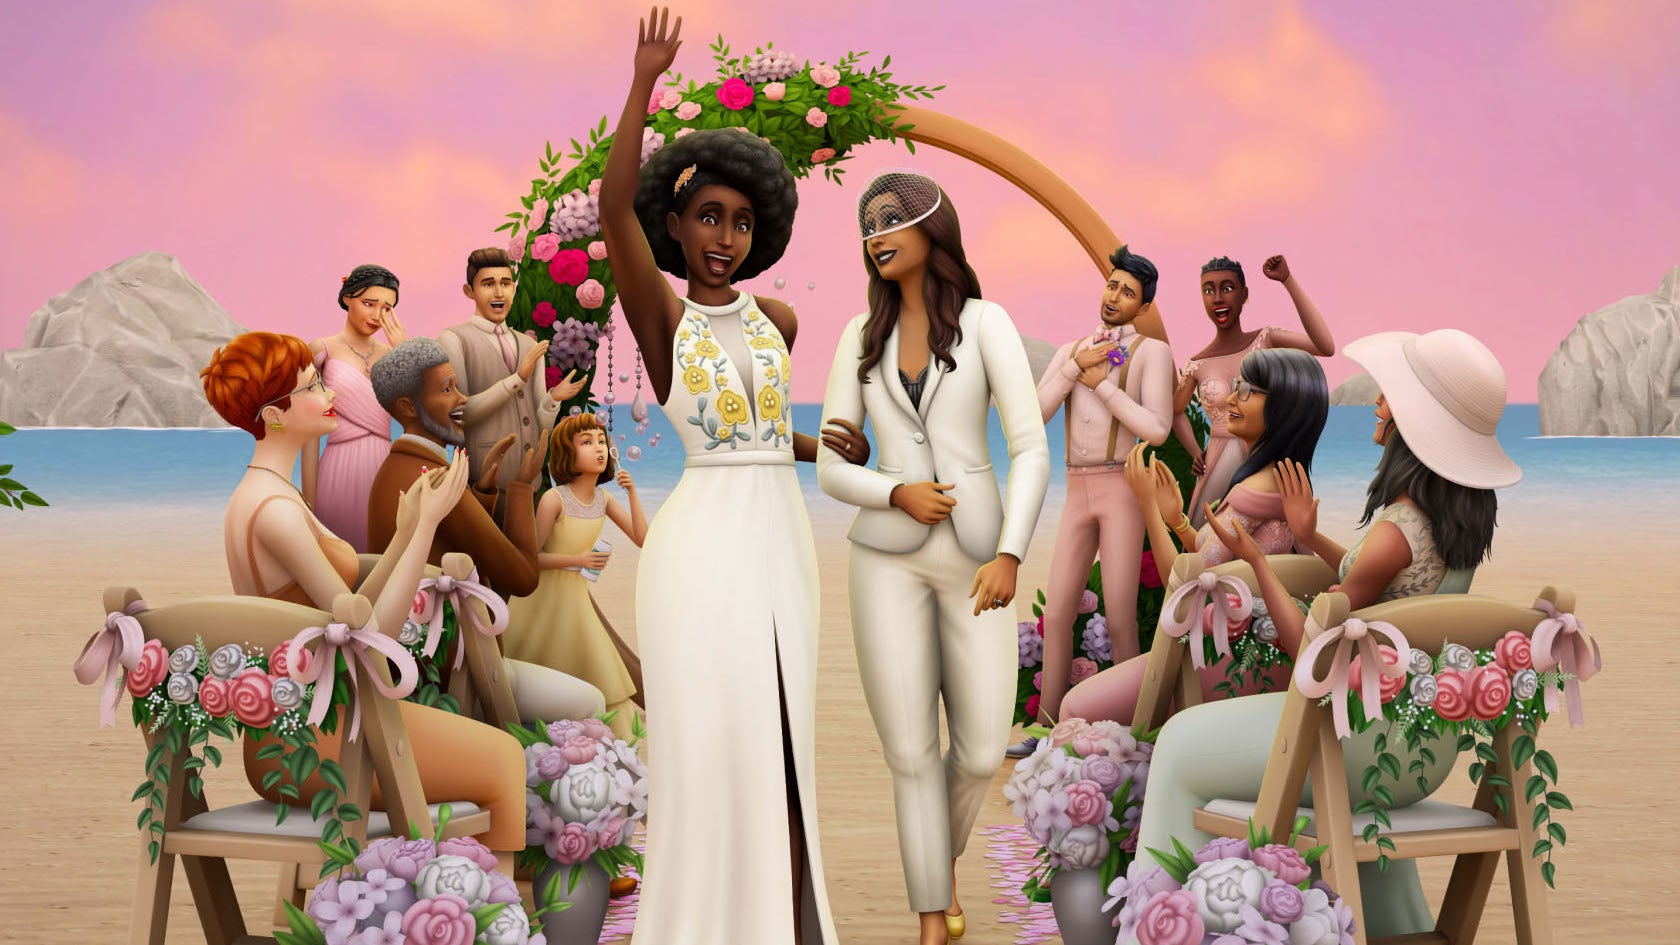 The Sims 4: My Wedding Stories Reveal Trailer - The Sims Resource - Blog